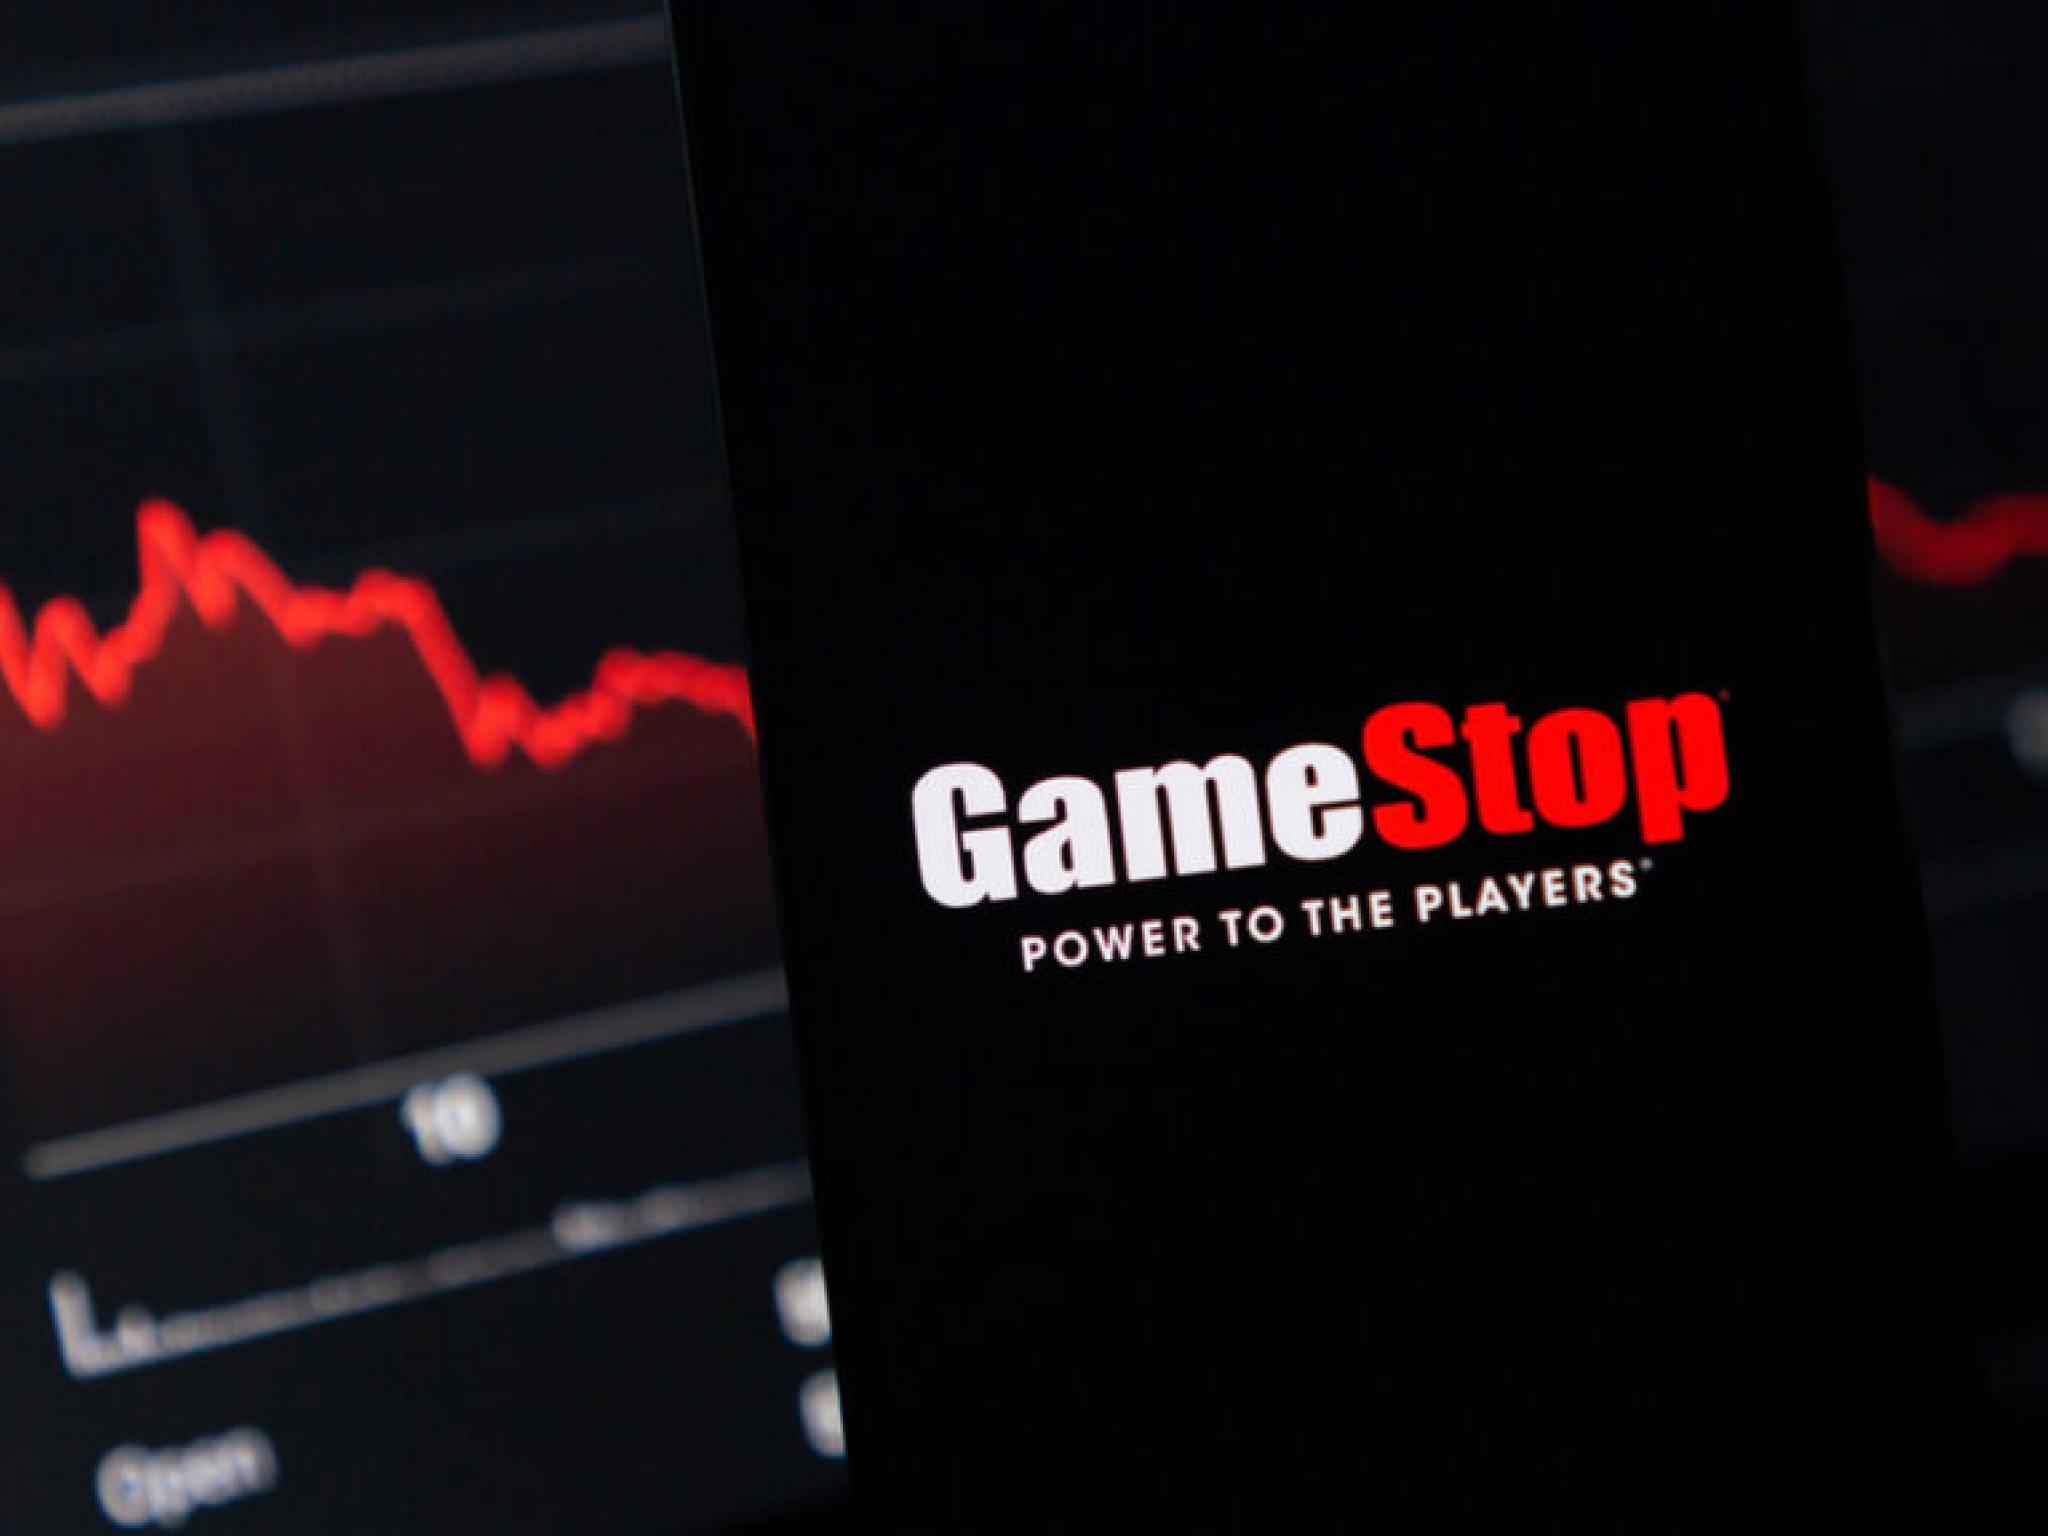  whats-going-on-with-gamestop-stock-after-hours 